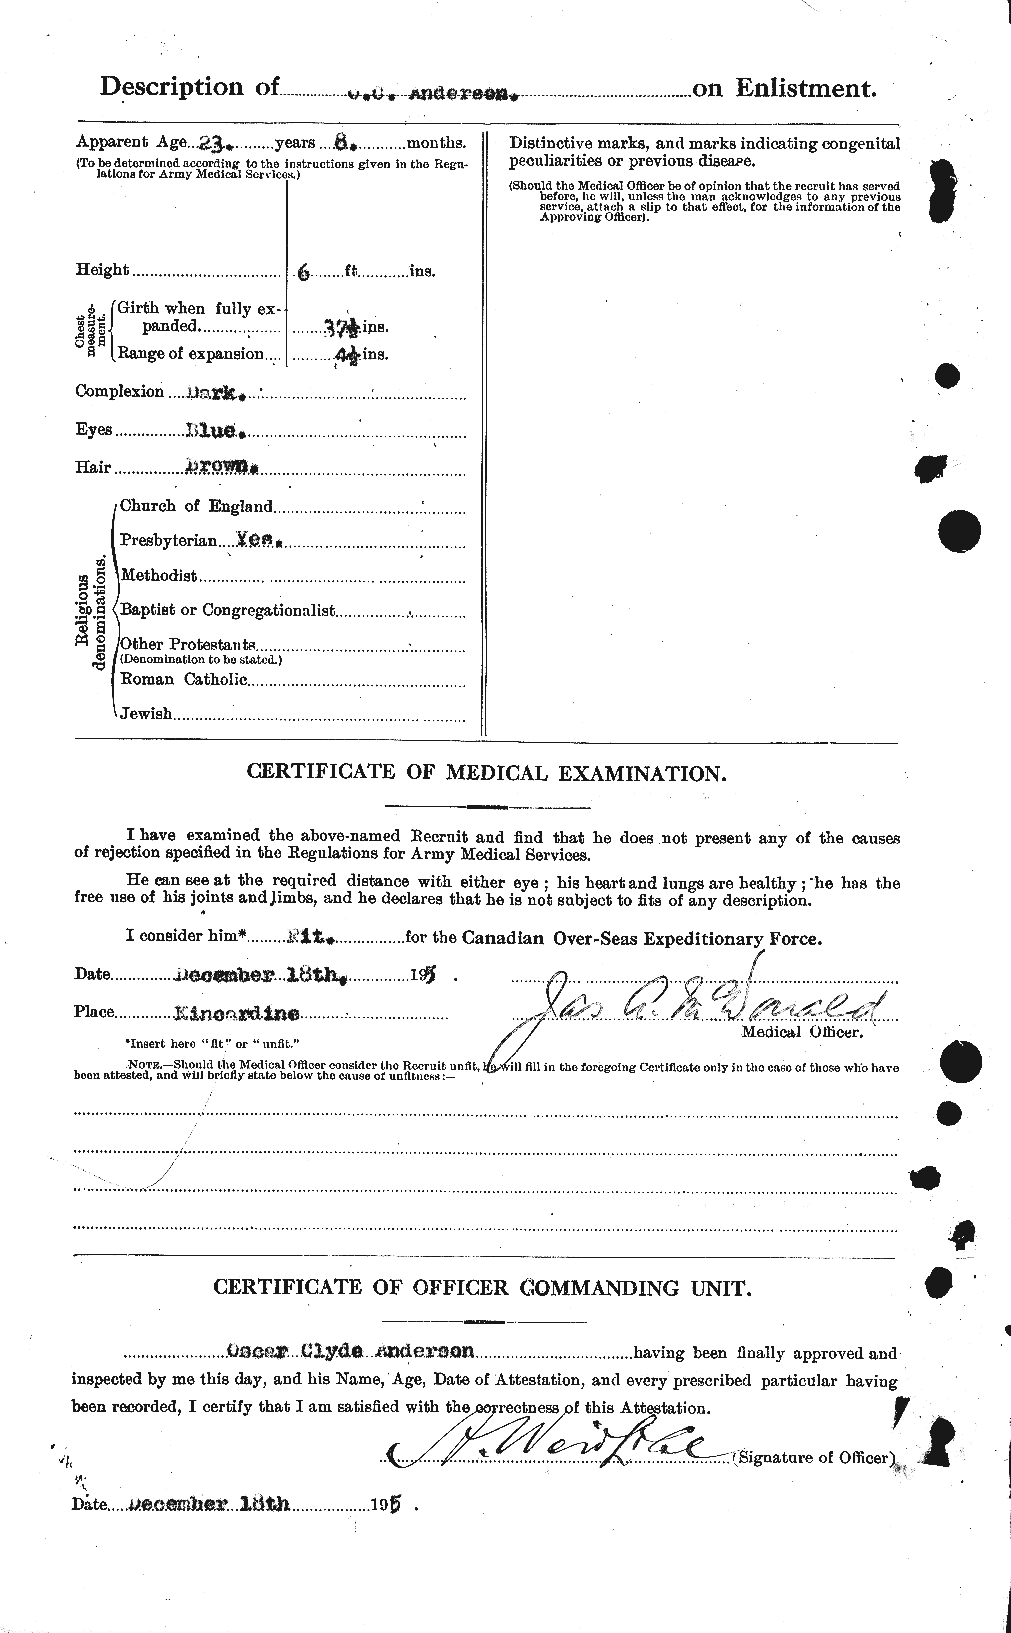 Personnel Records of the First World War - CEF 207379b